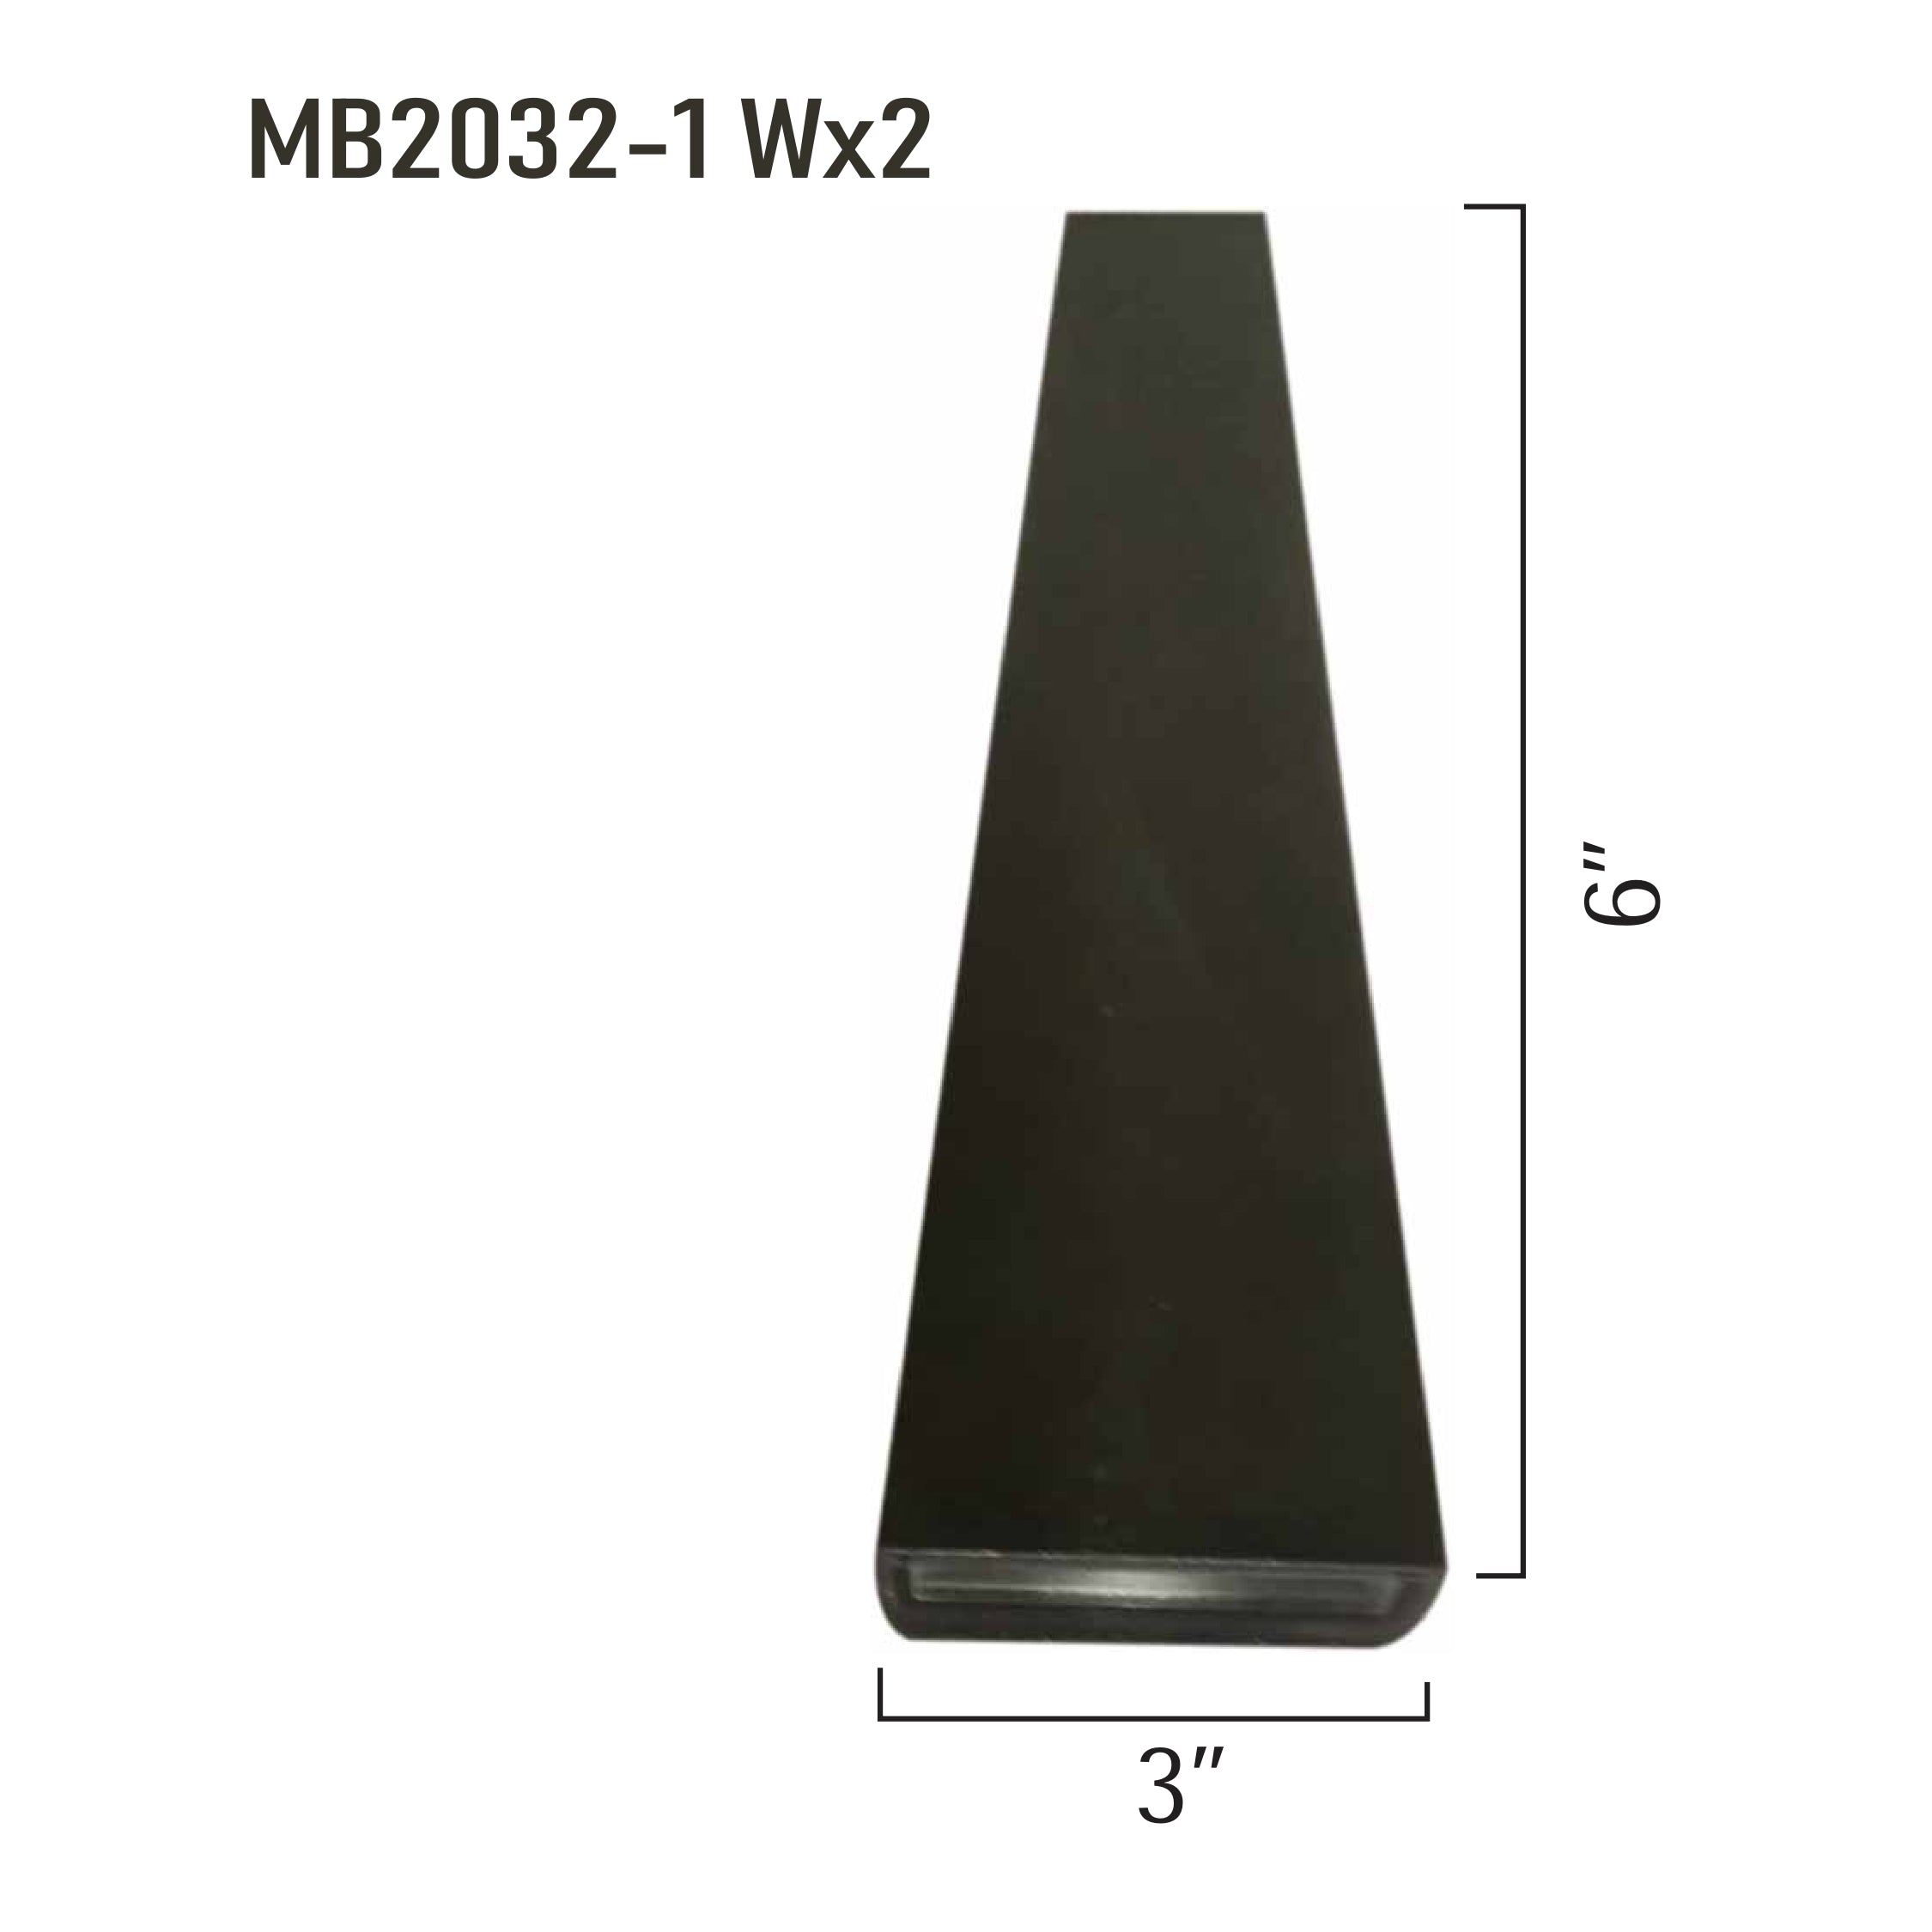 LED Outdoor Wall Light | MB2032-1WX2